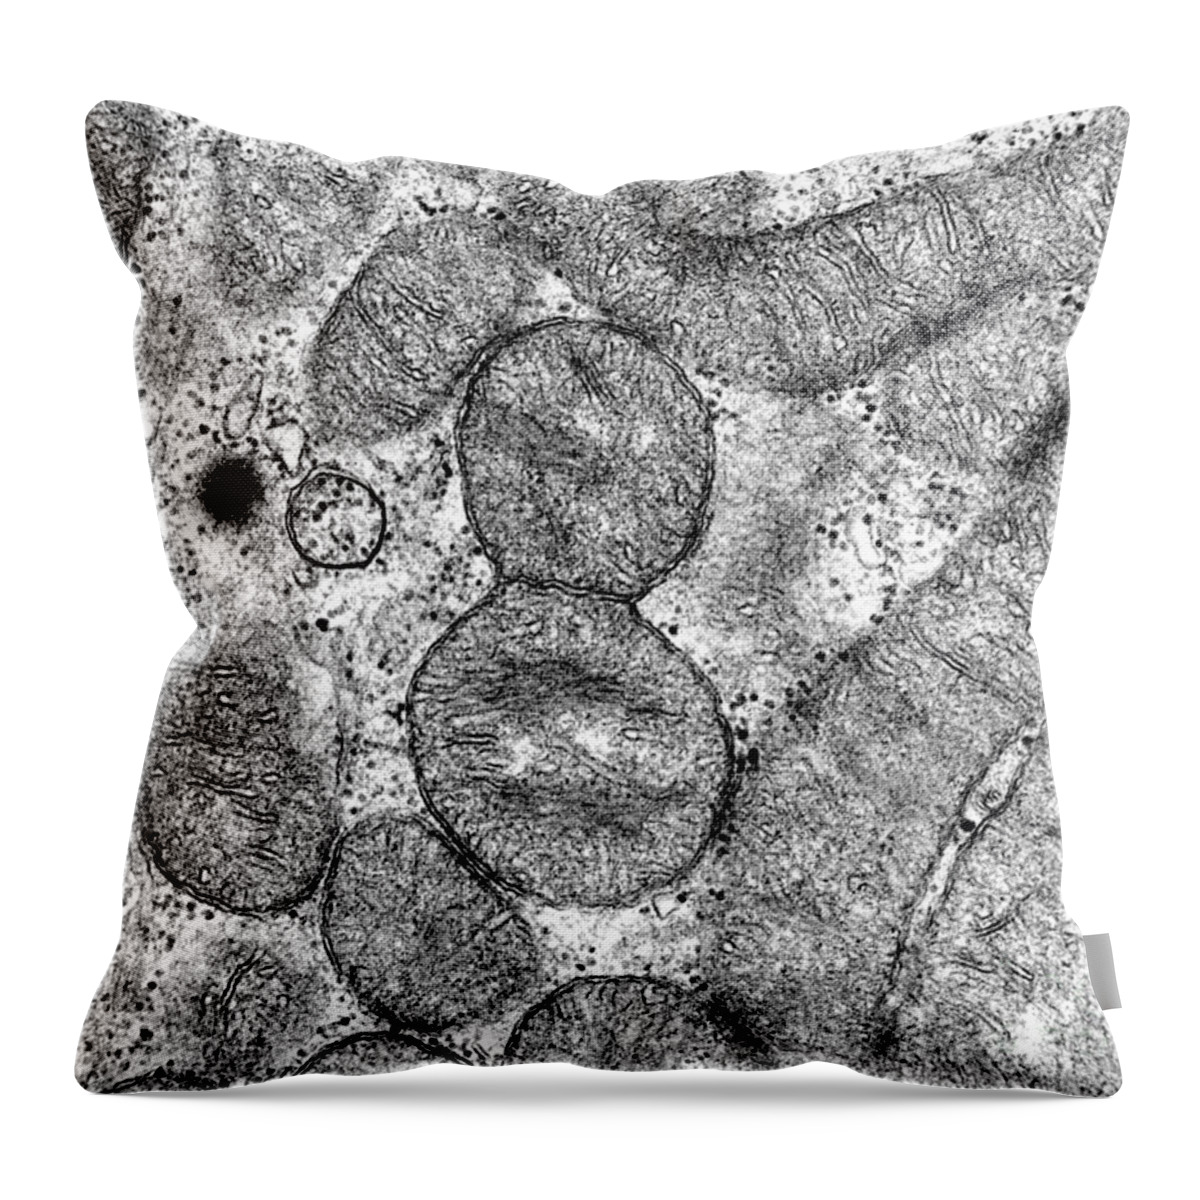 Mitochondrion Throw Pillow featuring the photograph Dividing Mitochondrion #1 by Omikron